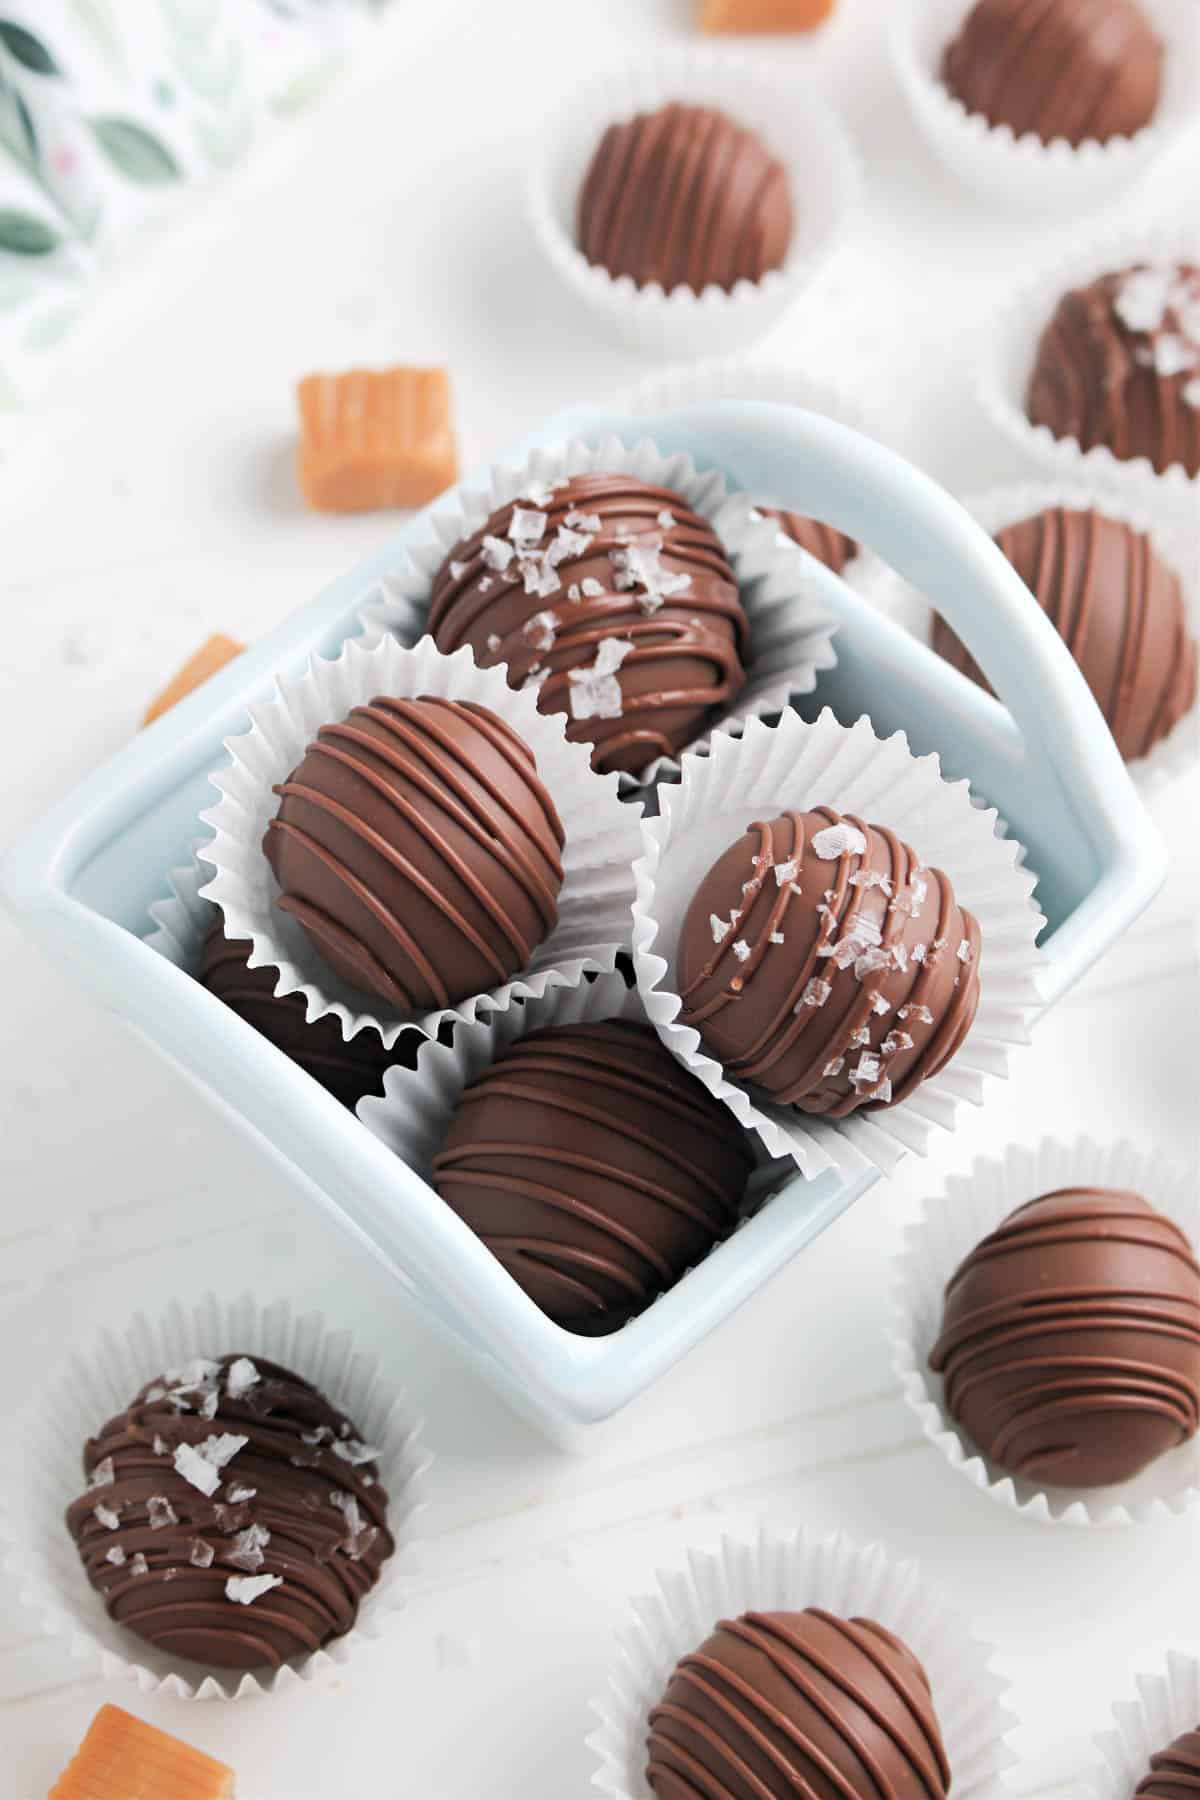 Chocolate truffles in a blue bowl on a white background.